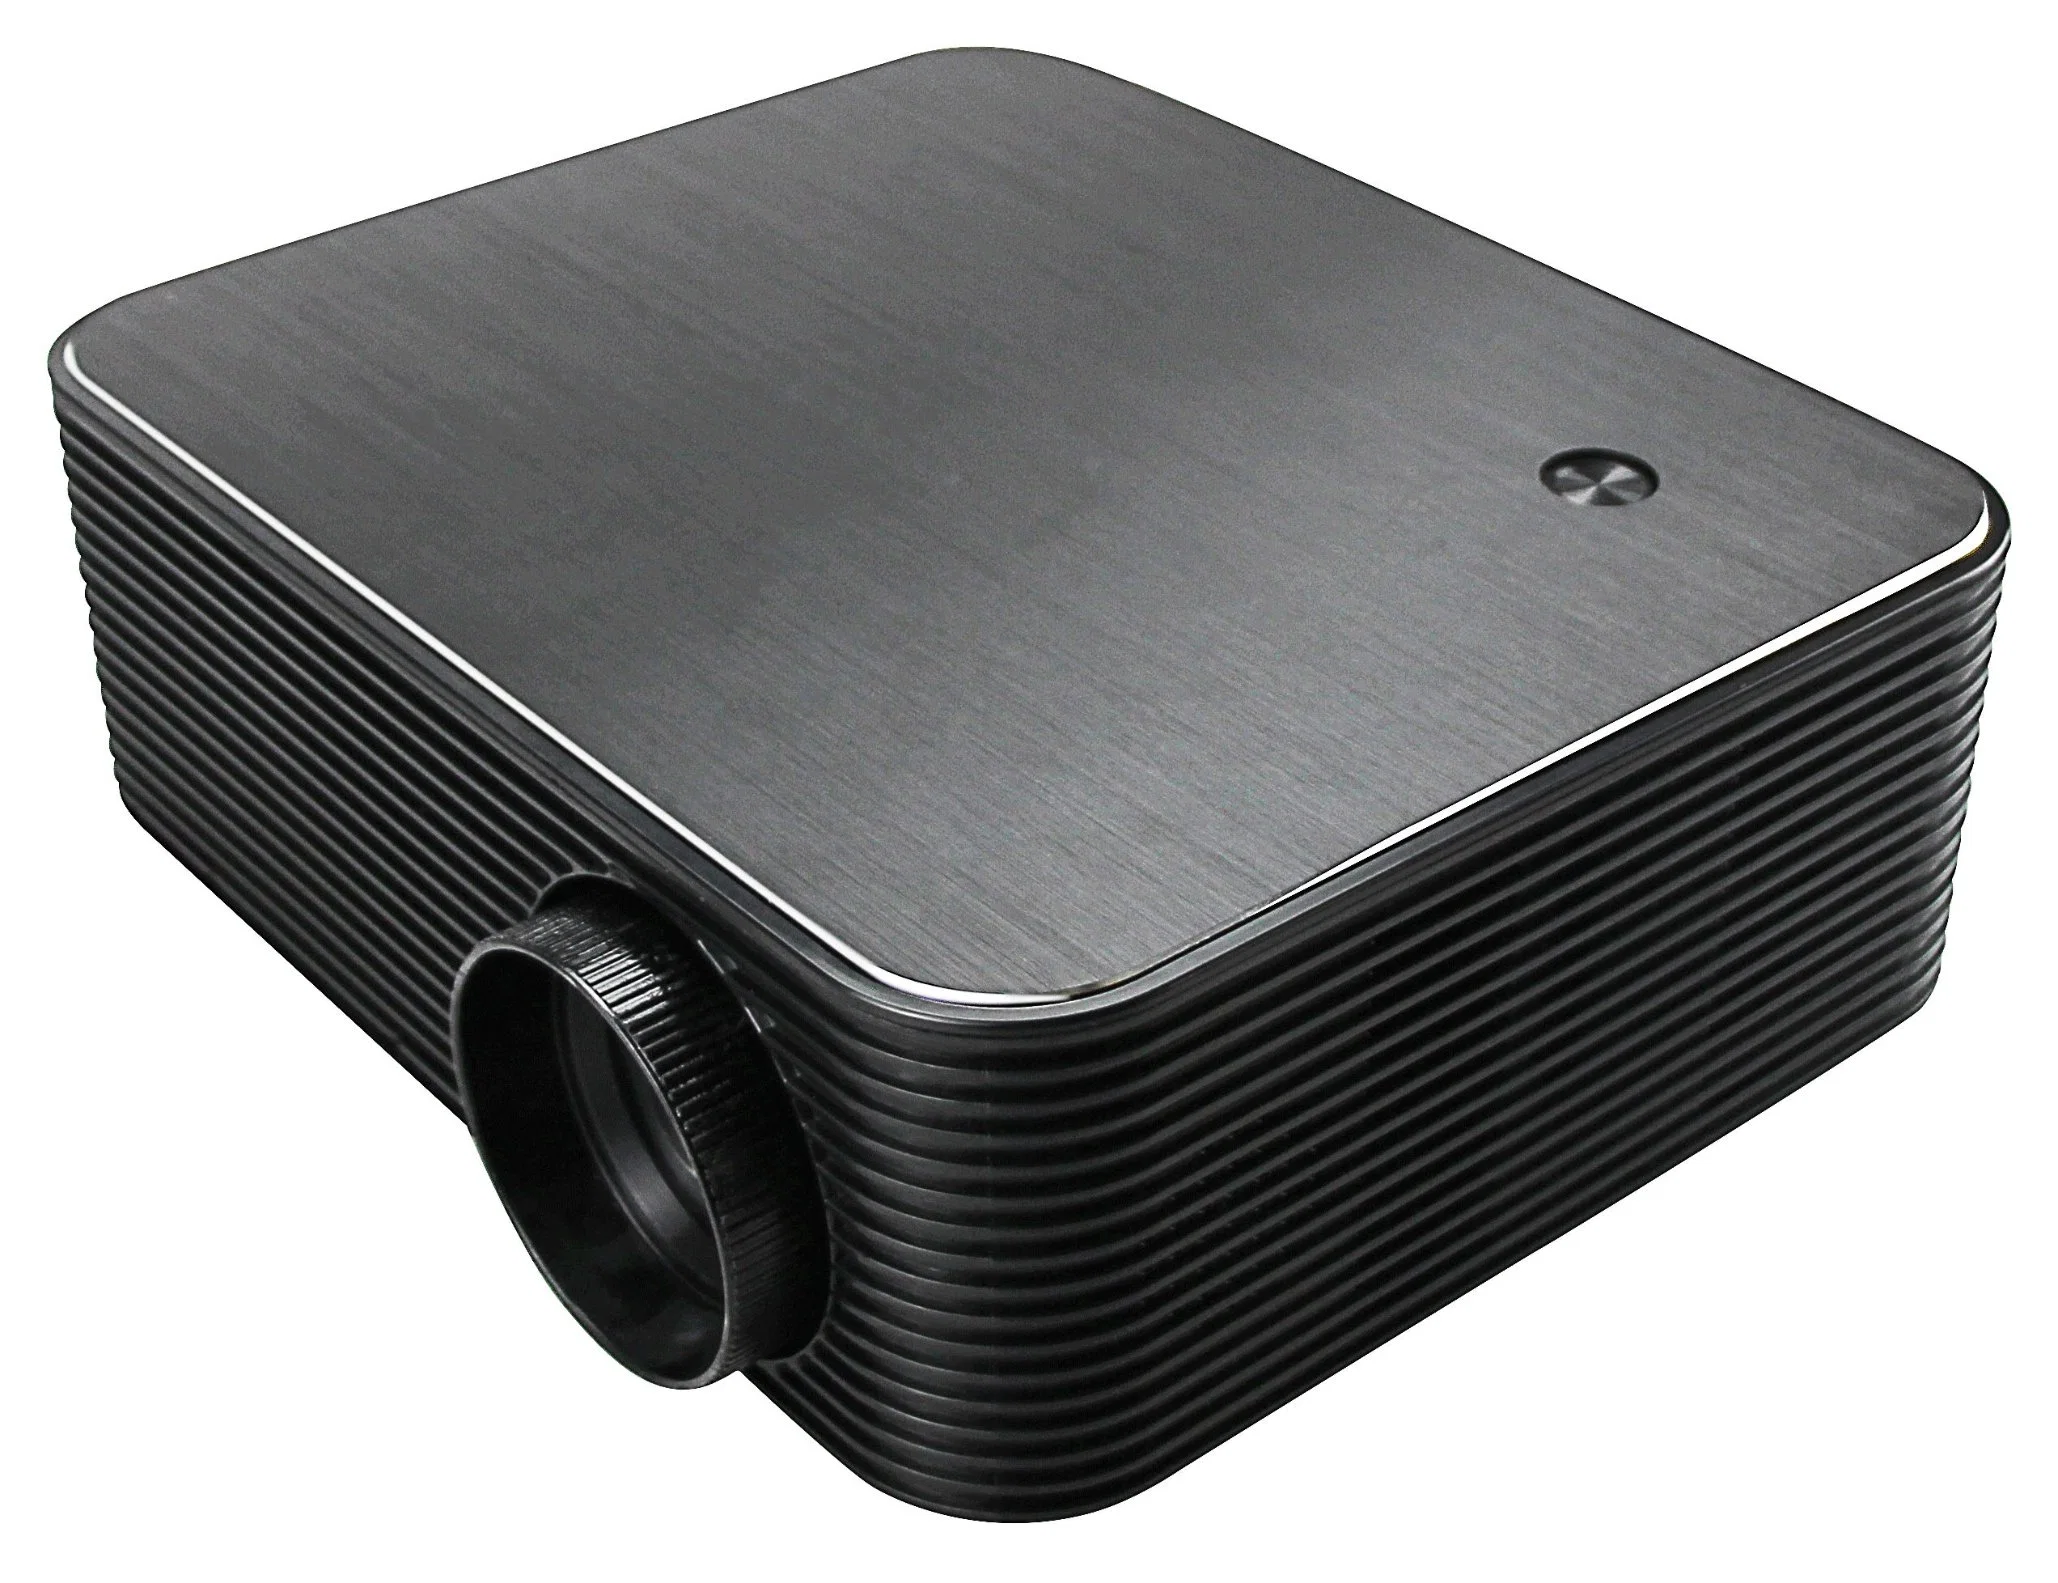 Native 1080P Resolution Full HD Android LED LCD Digital TV Video Projector